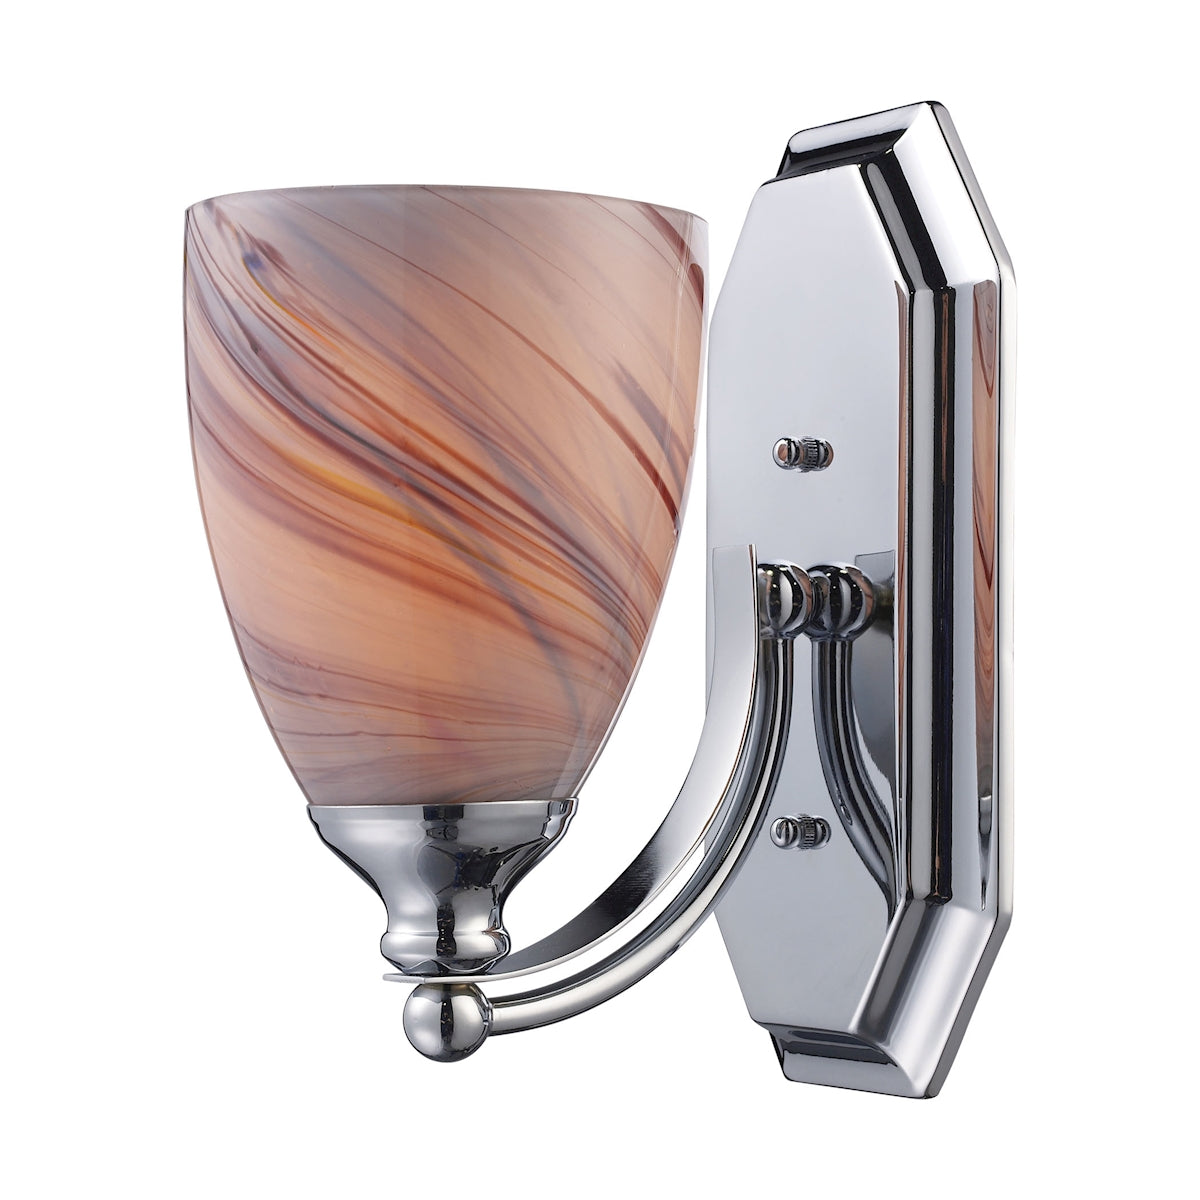 Mix and Match Vanity 1-Light Wall Lamp in Chrome with Creme Glass